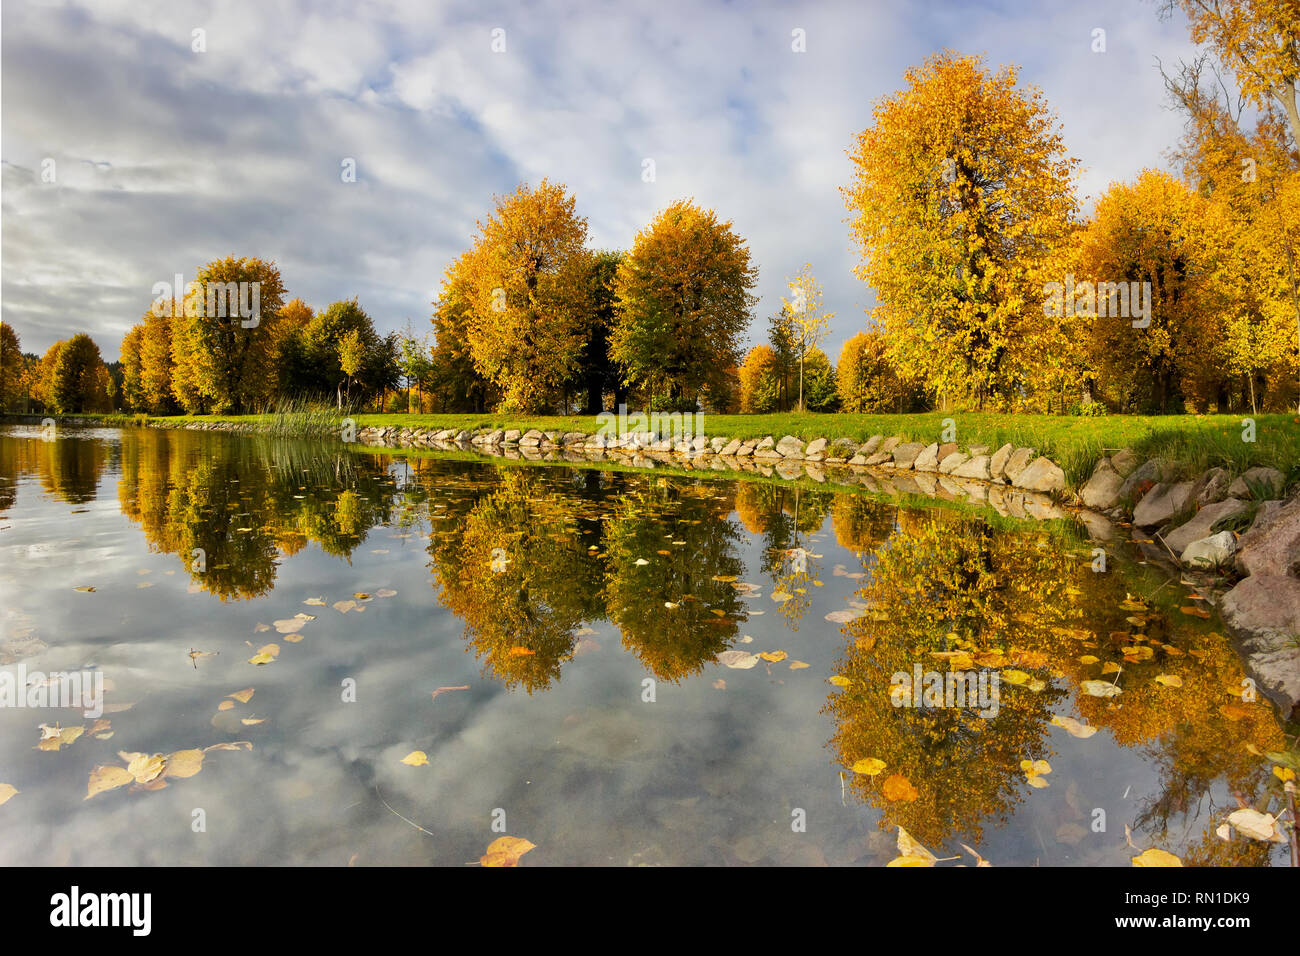 Barockparken (Barock park) artificial lake and floating foliage waterscape scenery with warm-coloured birch tree foliage. Upplands Vasby, Sweden Stock Photo